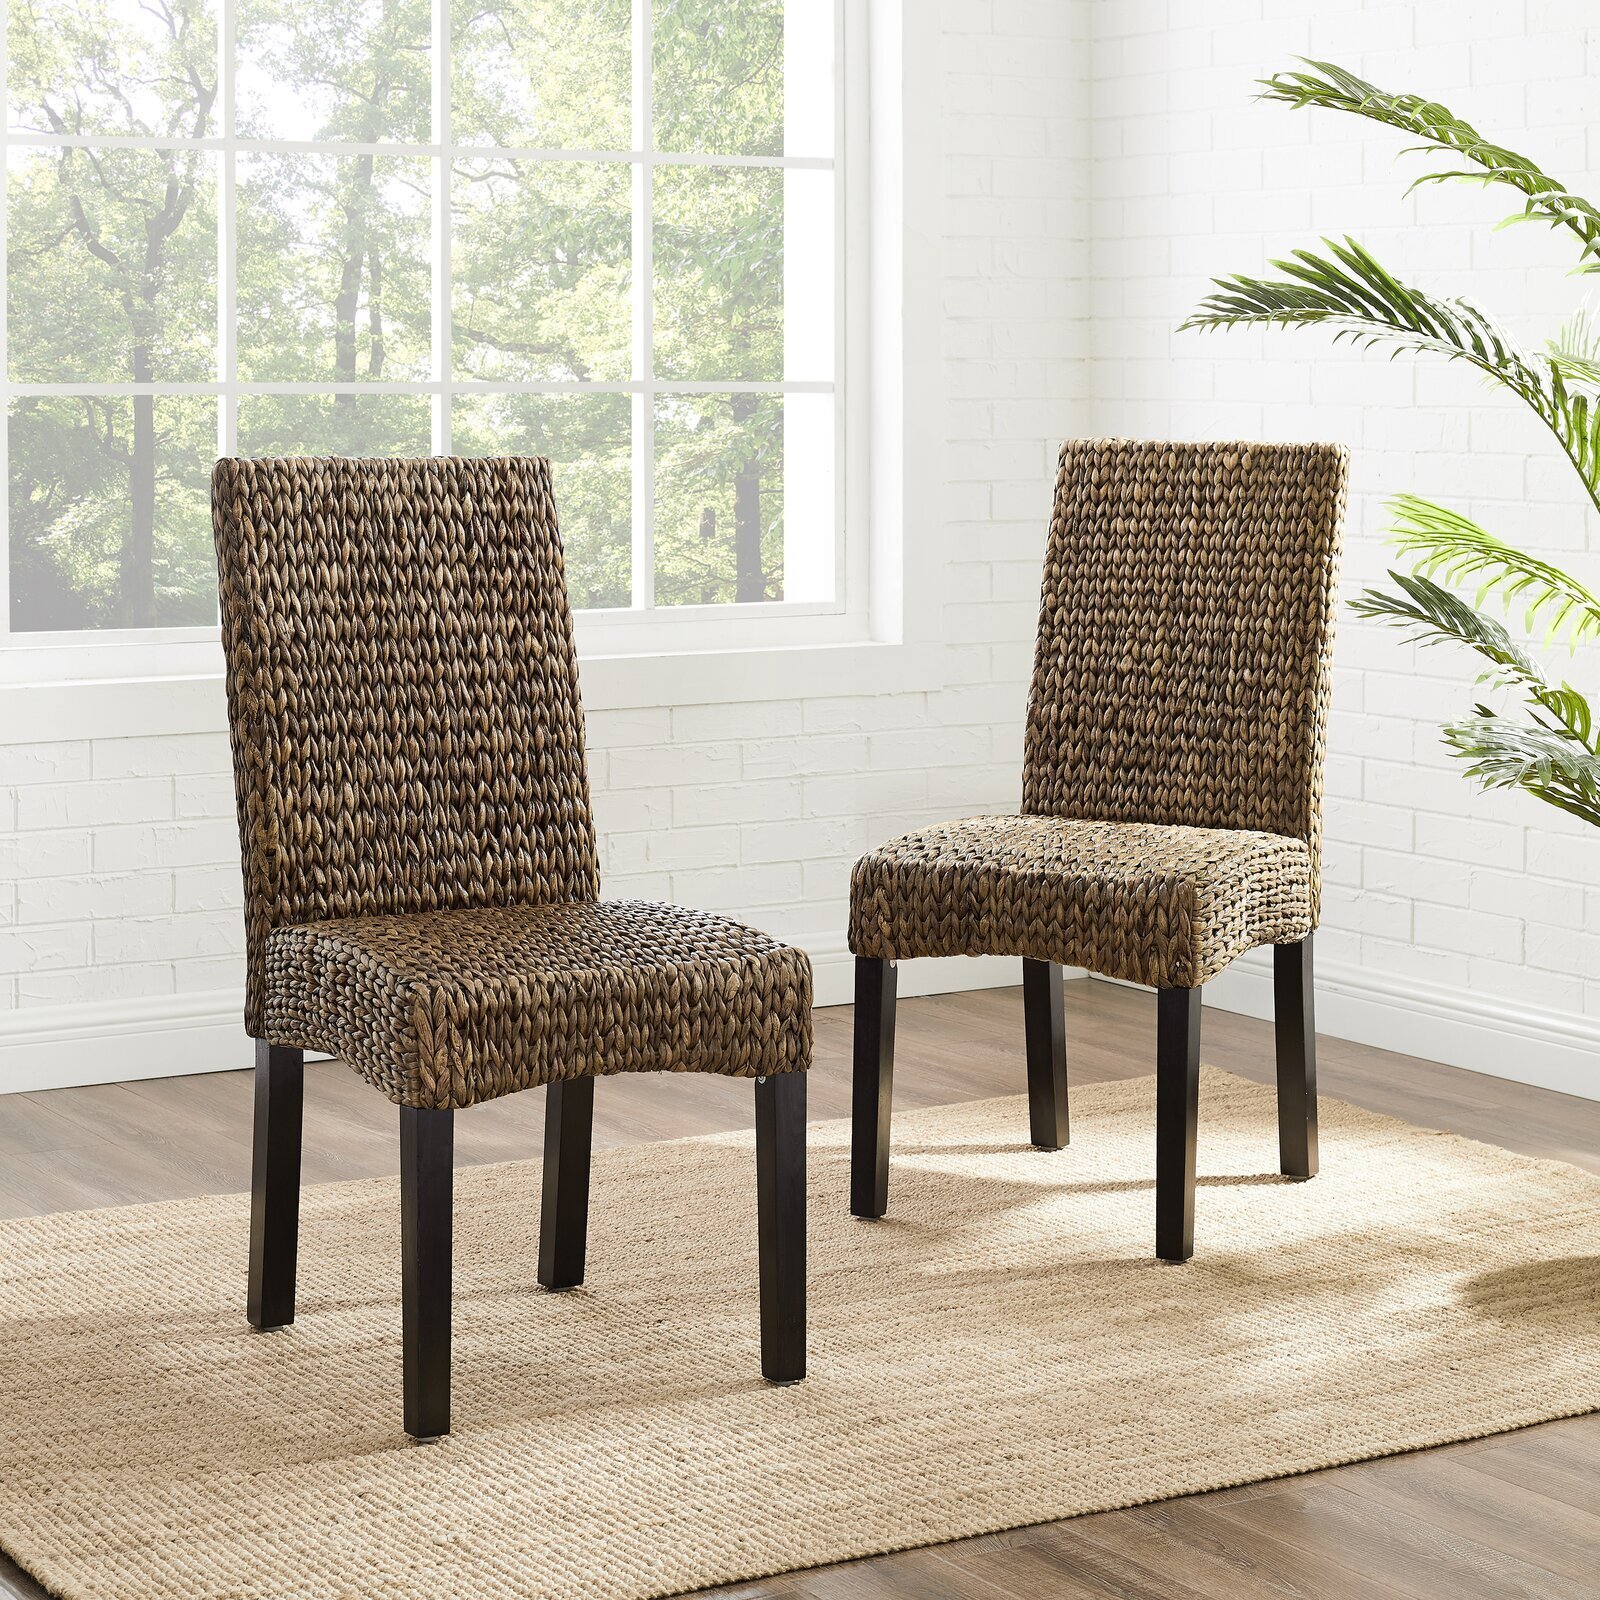 Classic Seagrass Dining Chairs